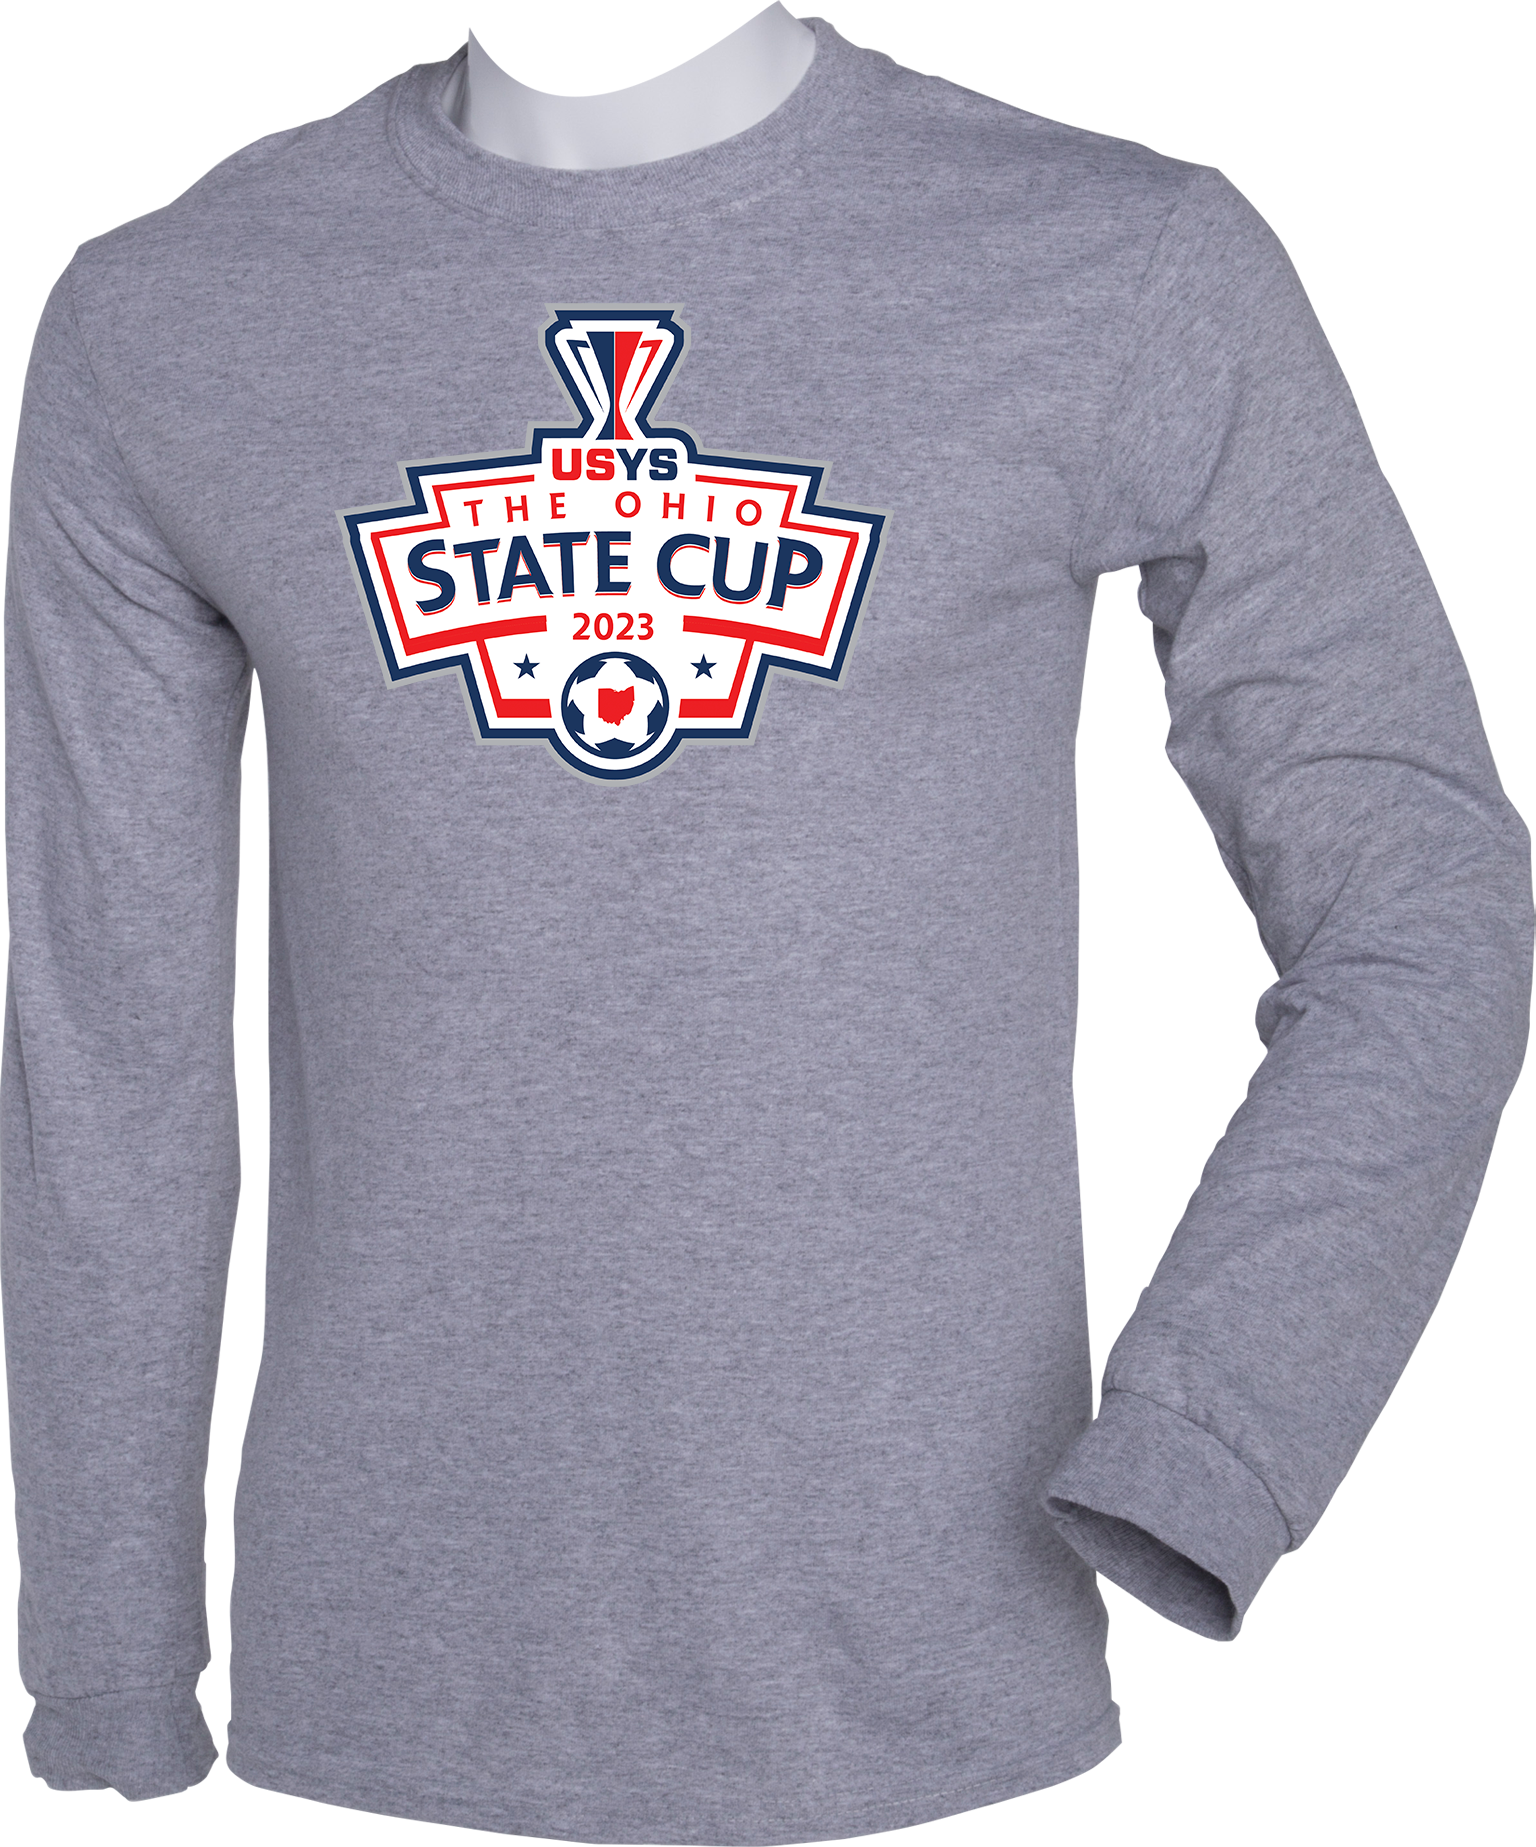 LONG SLEEVES - 2023 USYS The Ohio State Cup